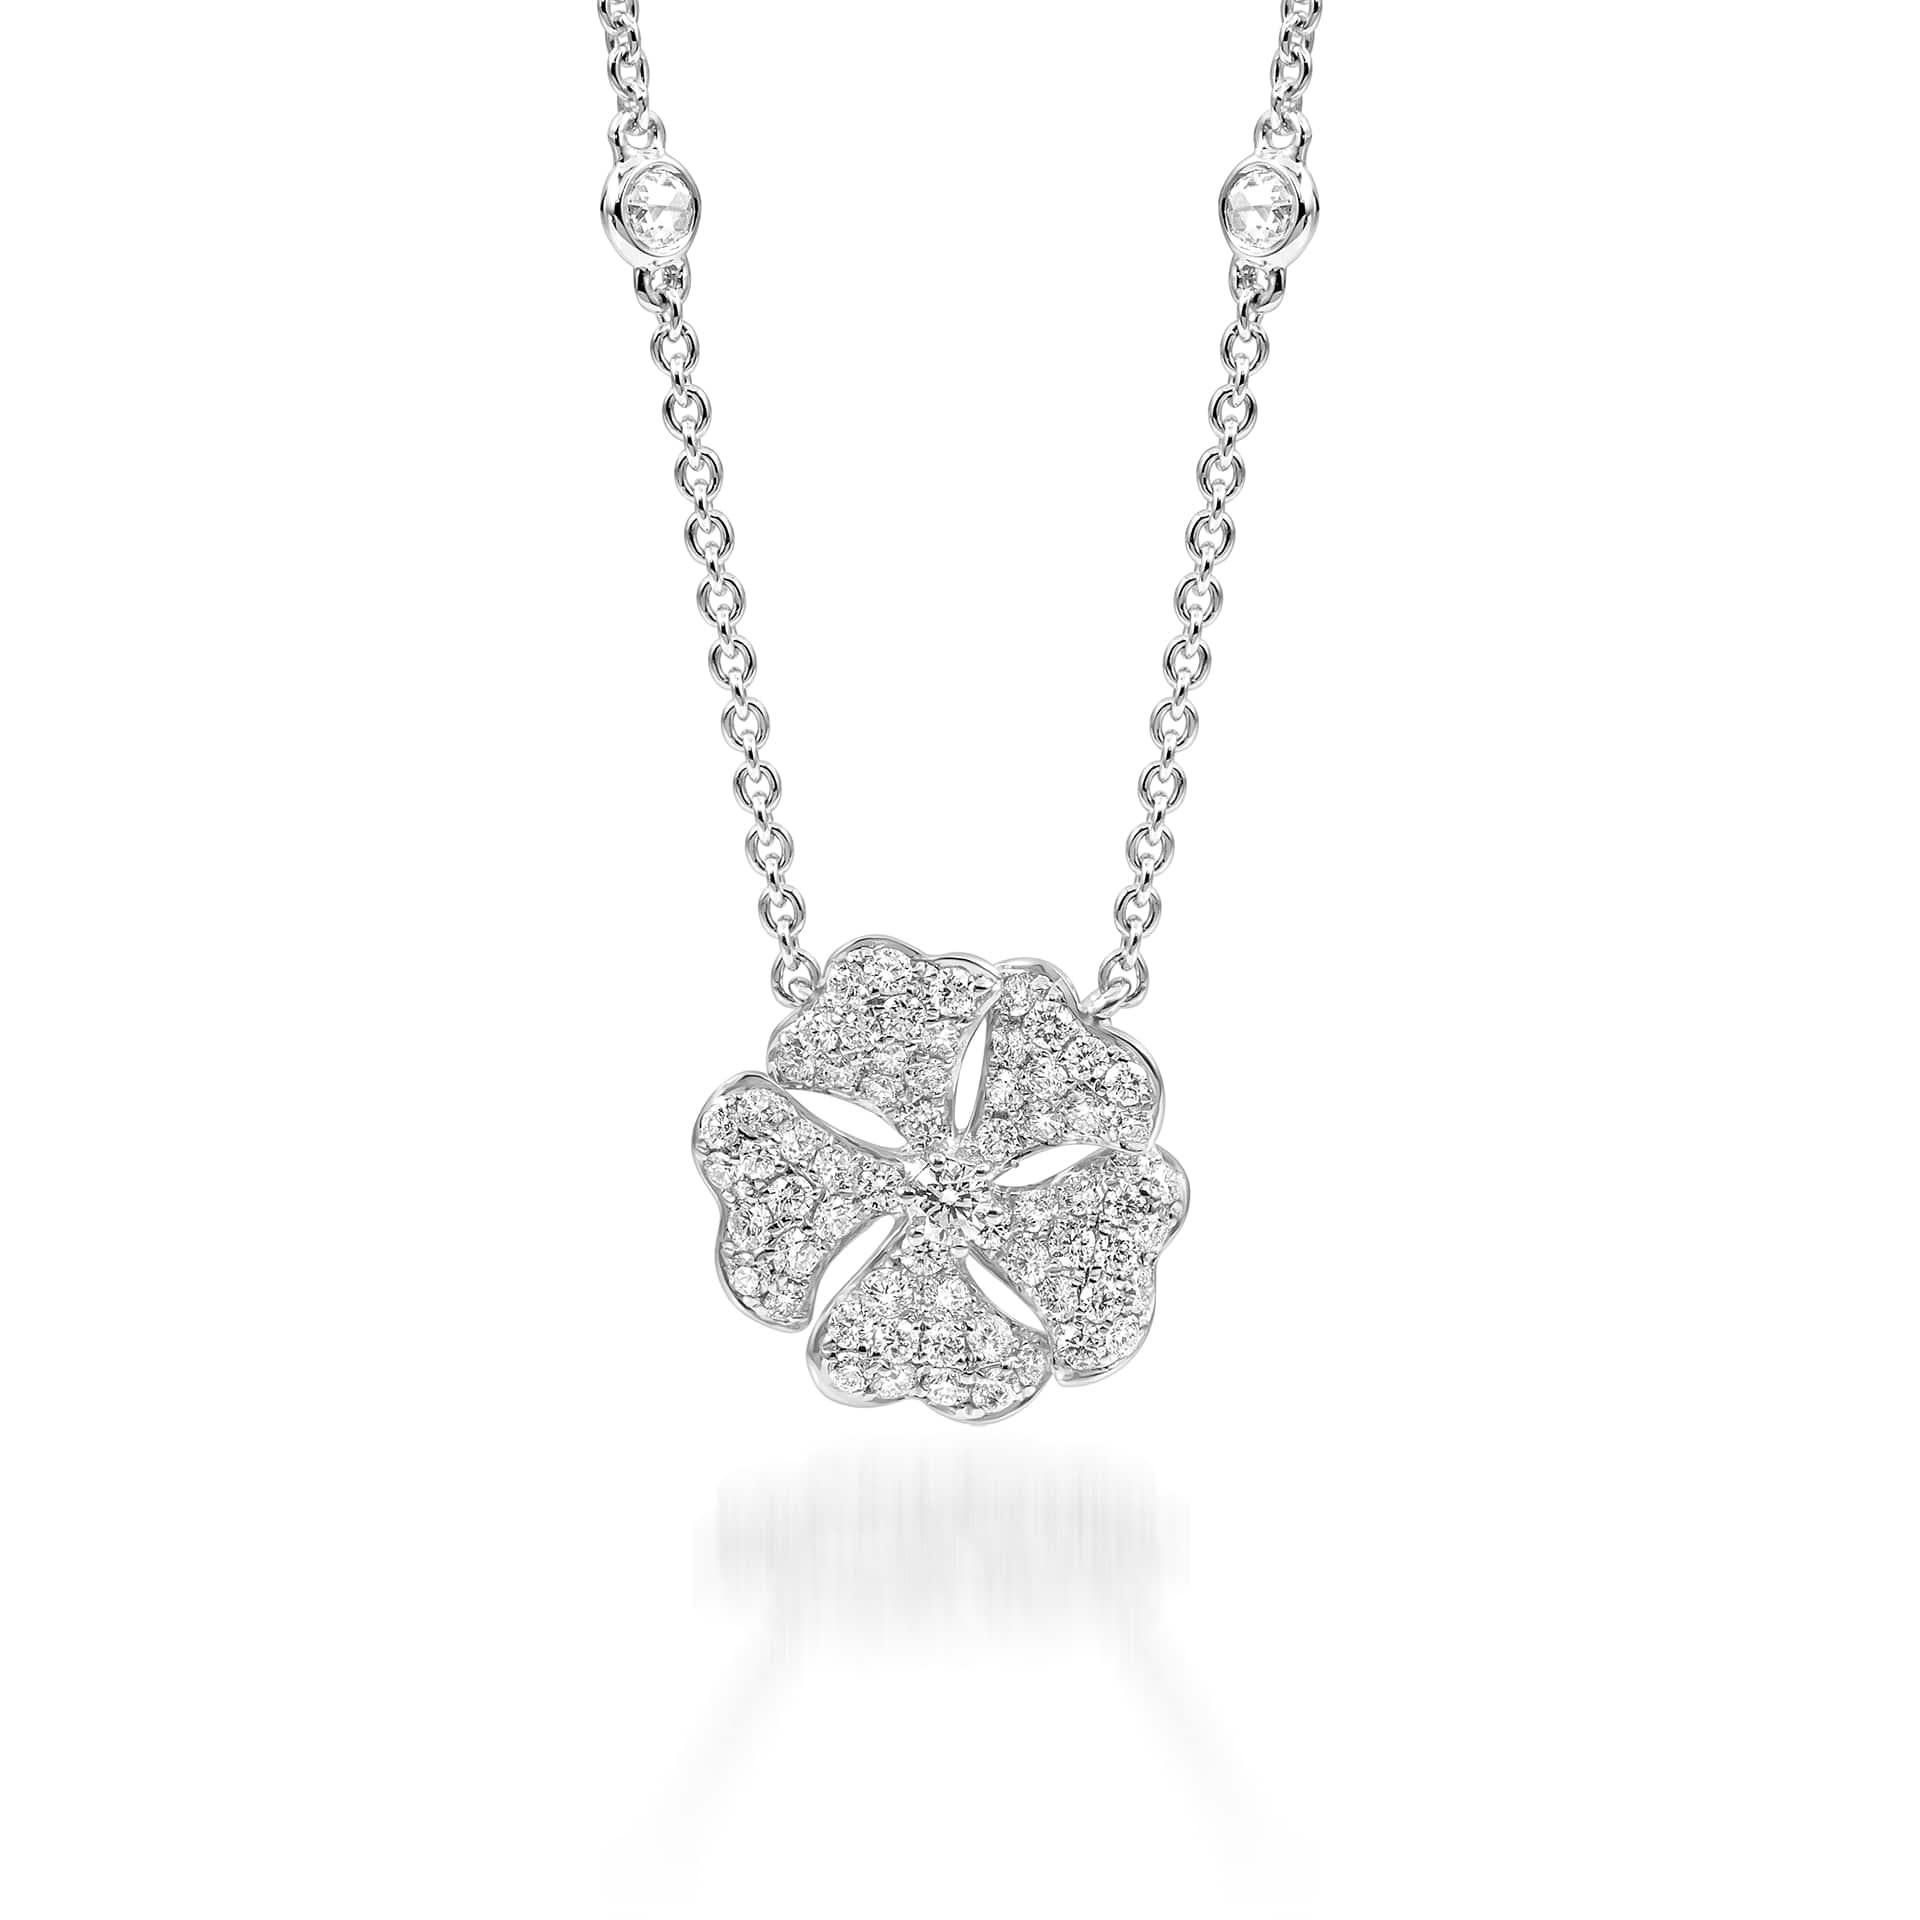 Bloom Diamond Solo Flower Necklace in 18K White Gold

Inspired by the exquisite petals of the alpine cinquefoil flower, the Bloom collection combines the richness of diamonds and precious metals with the light versatility of this delicate,